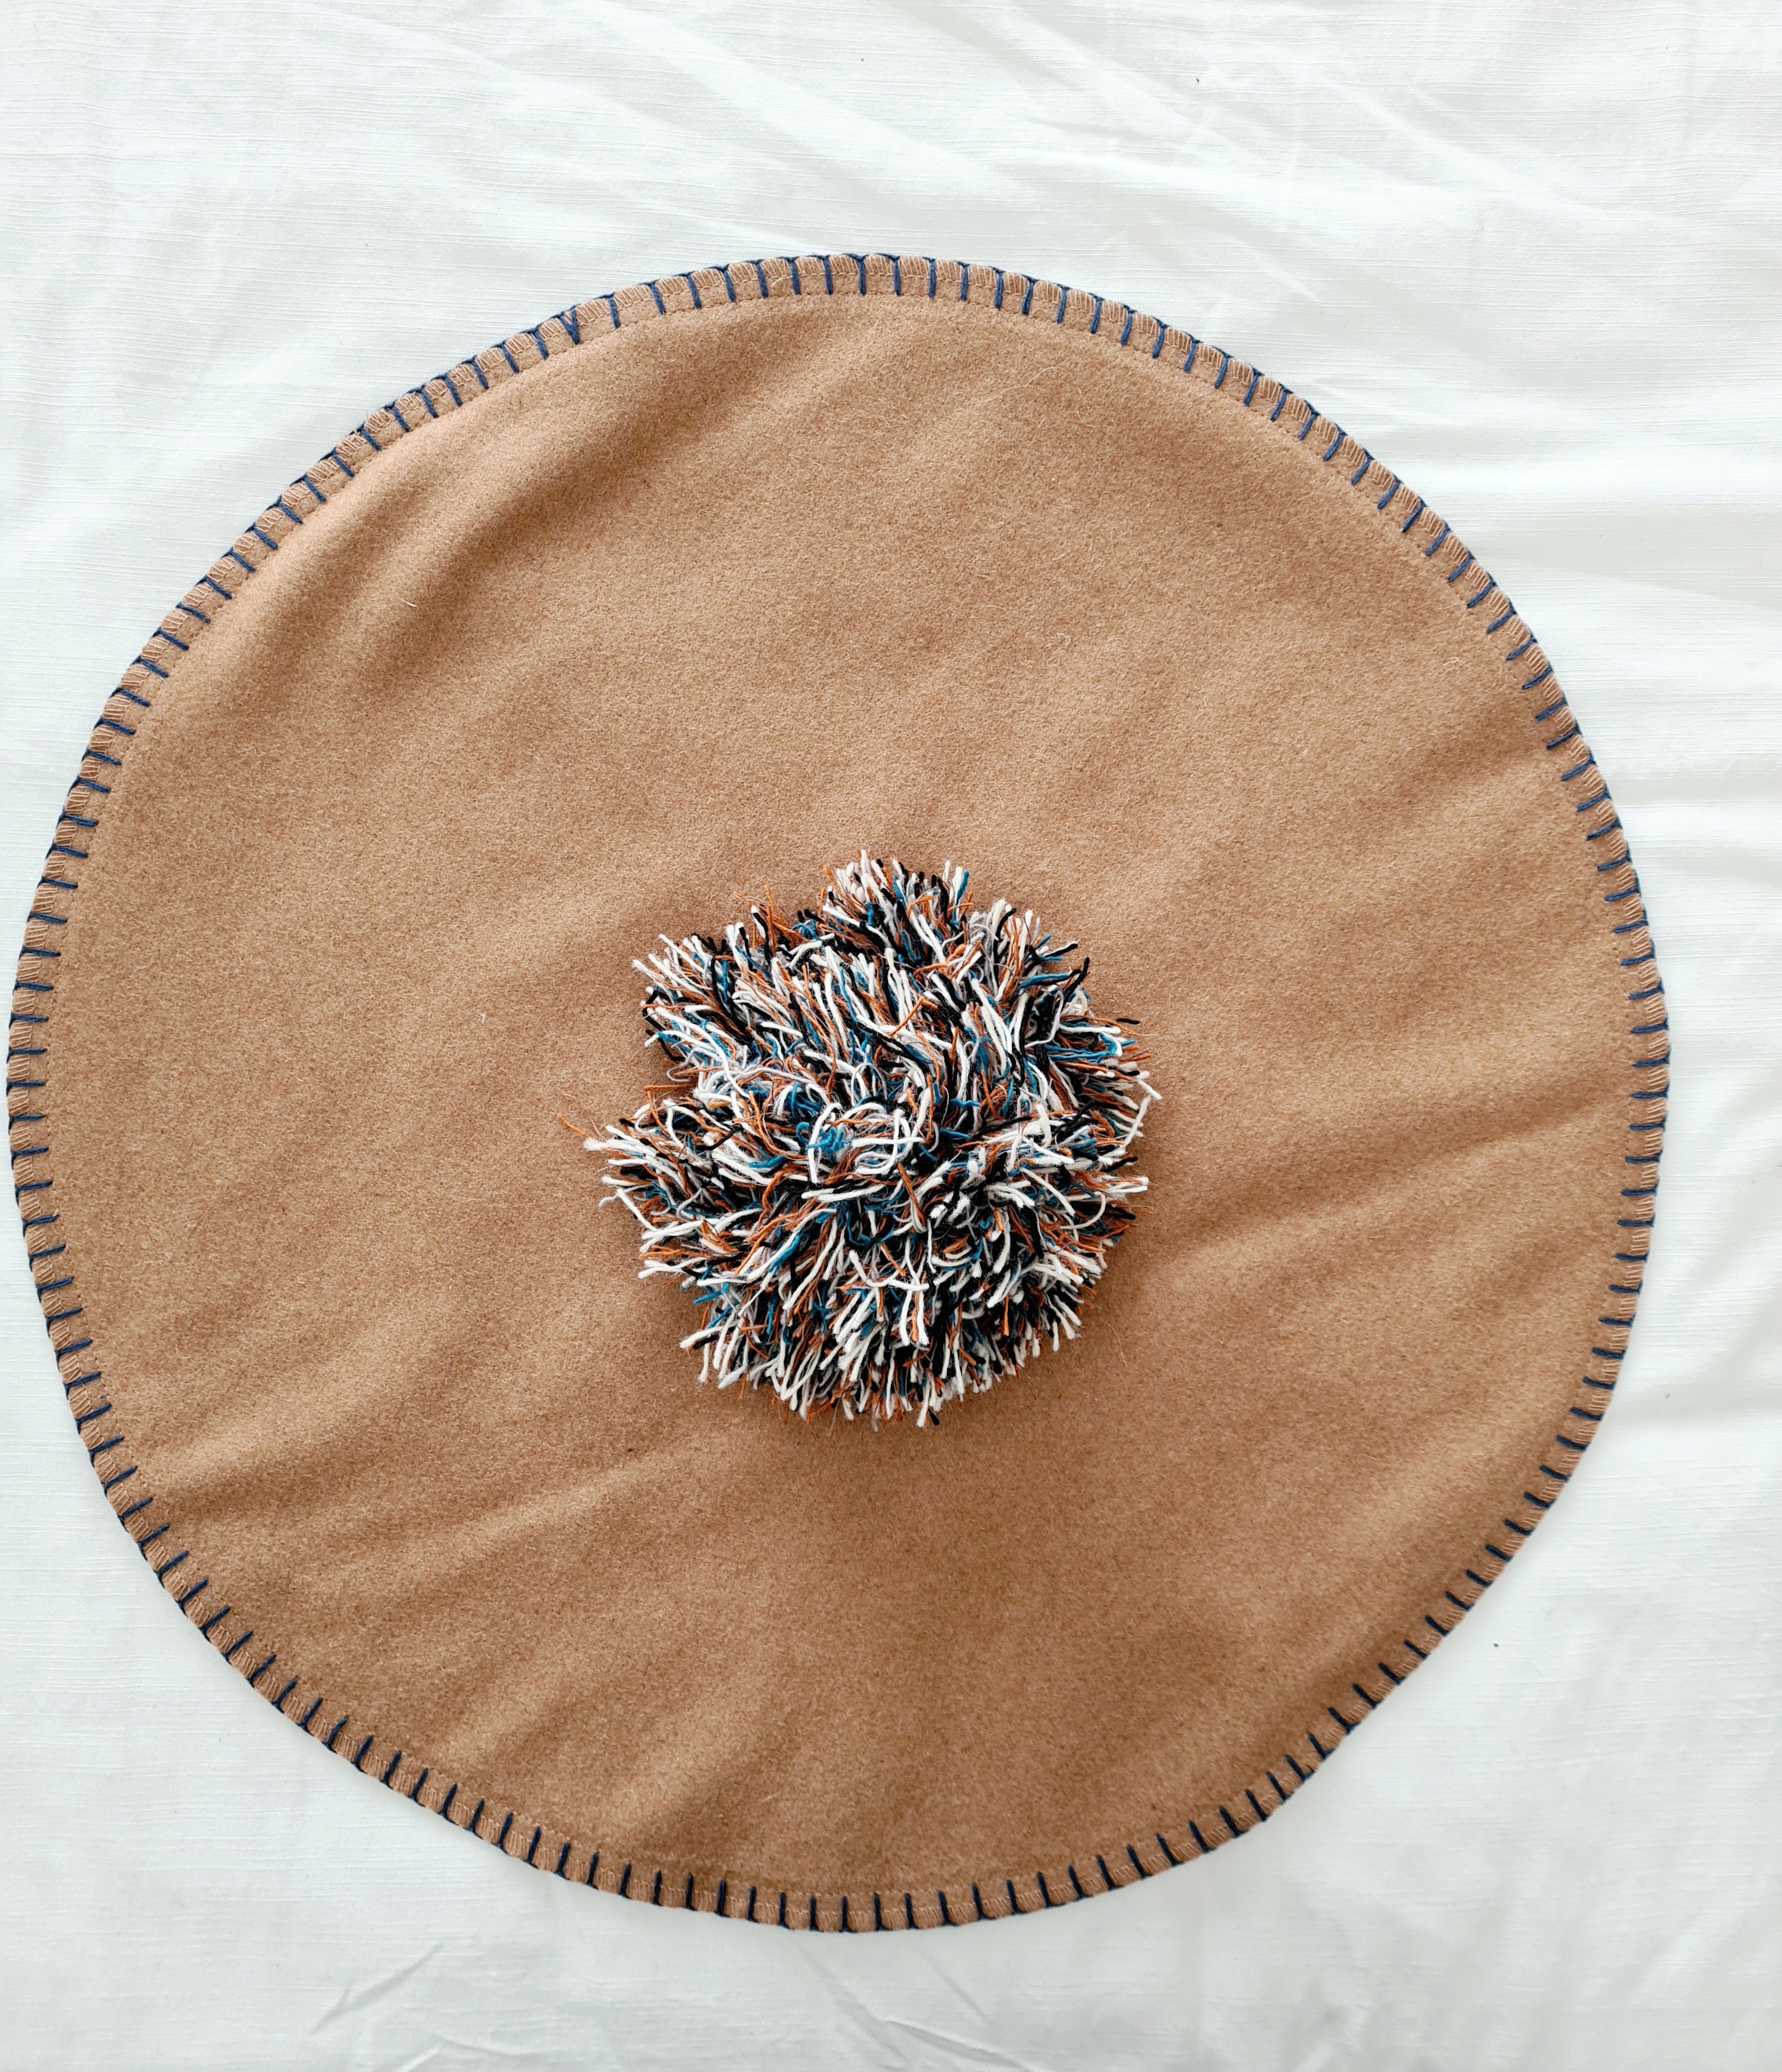 Limited Edition Organic Wool Cushions - Hessian Pony AW 2022 Ottoman Cushions The Spotted Quoll 45cm Caramel & Denim 